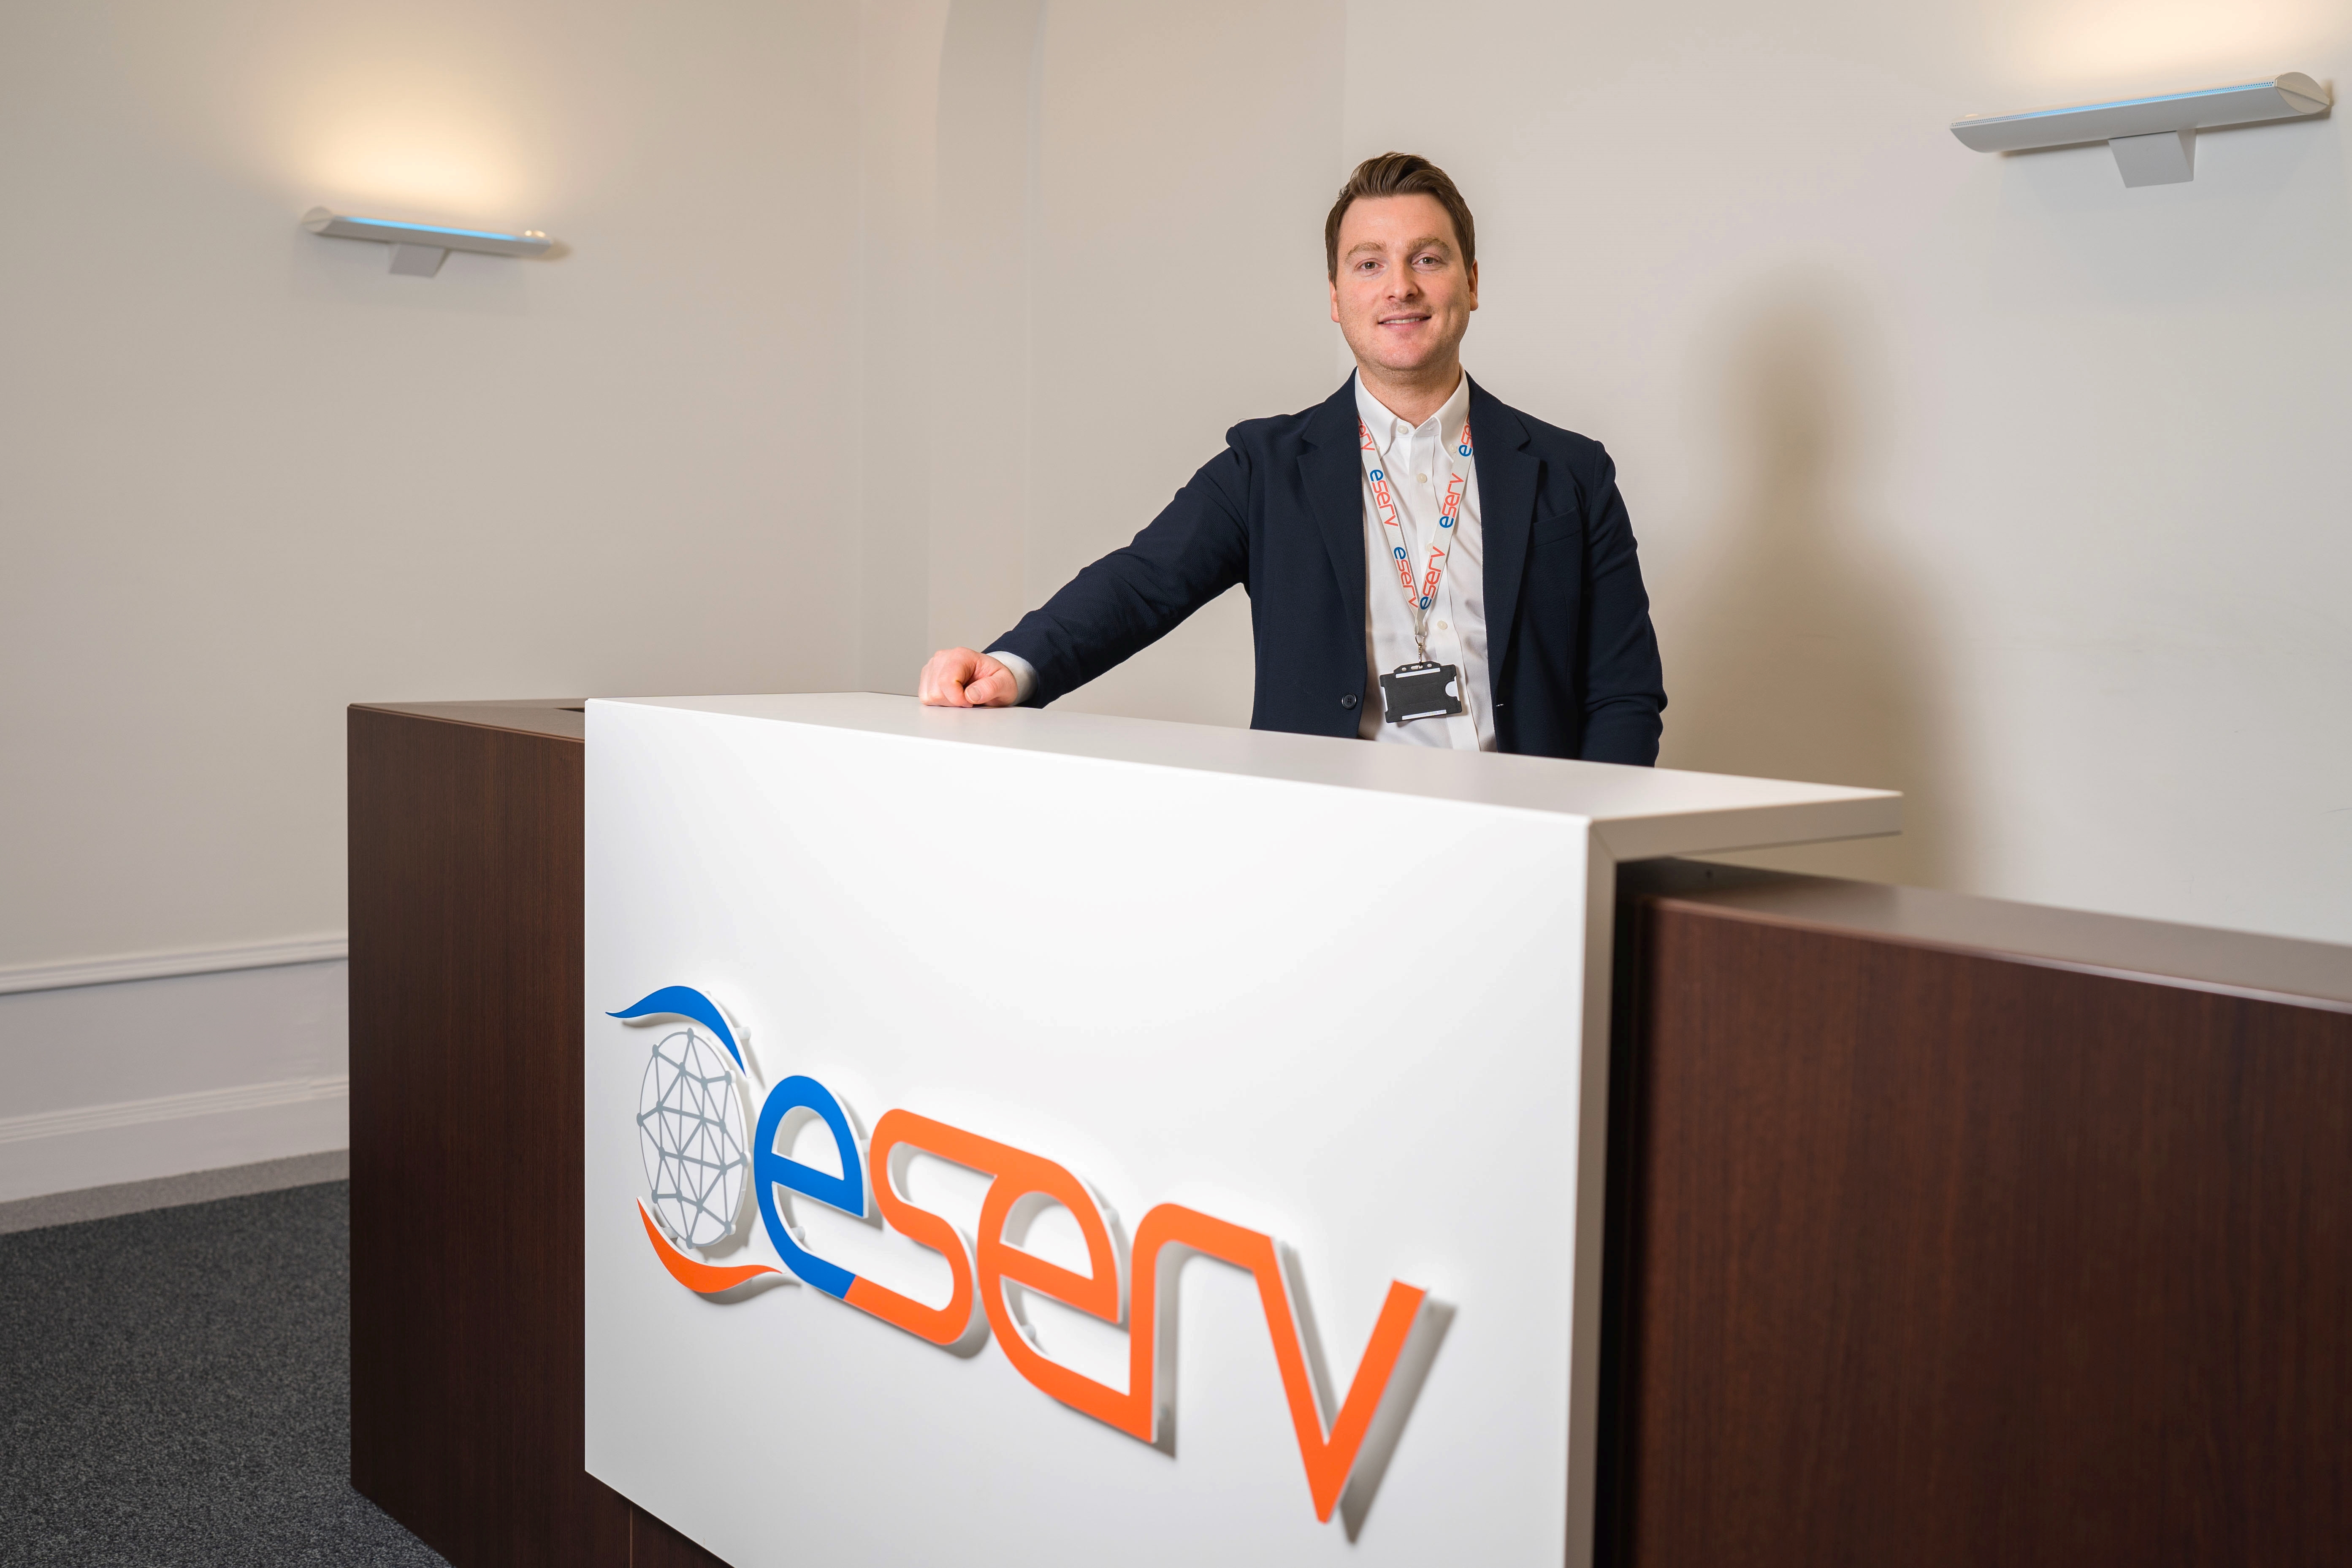 Eserv moves into new Aberdeen HQ to accommodate rapid growth